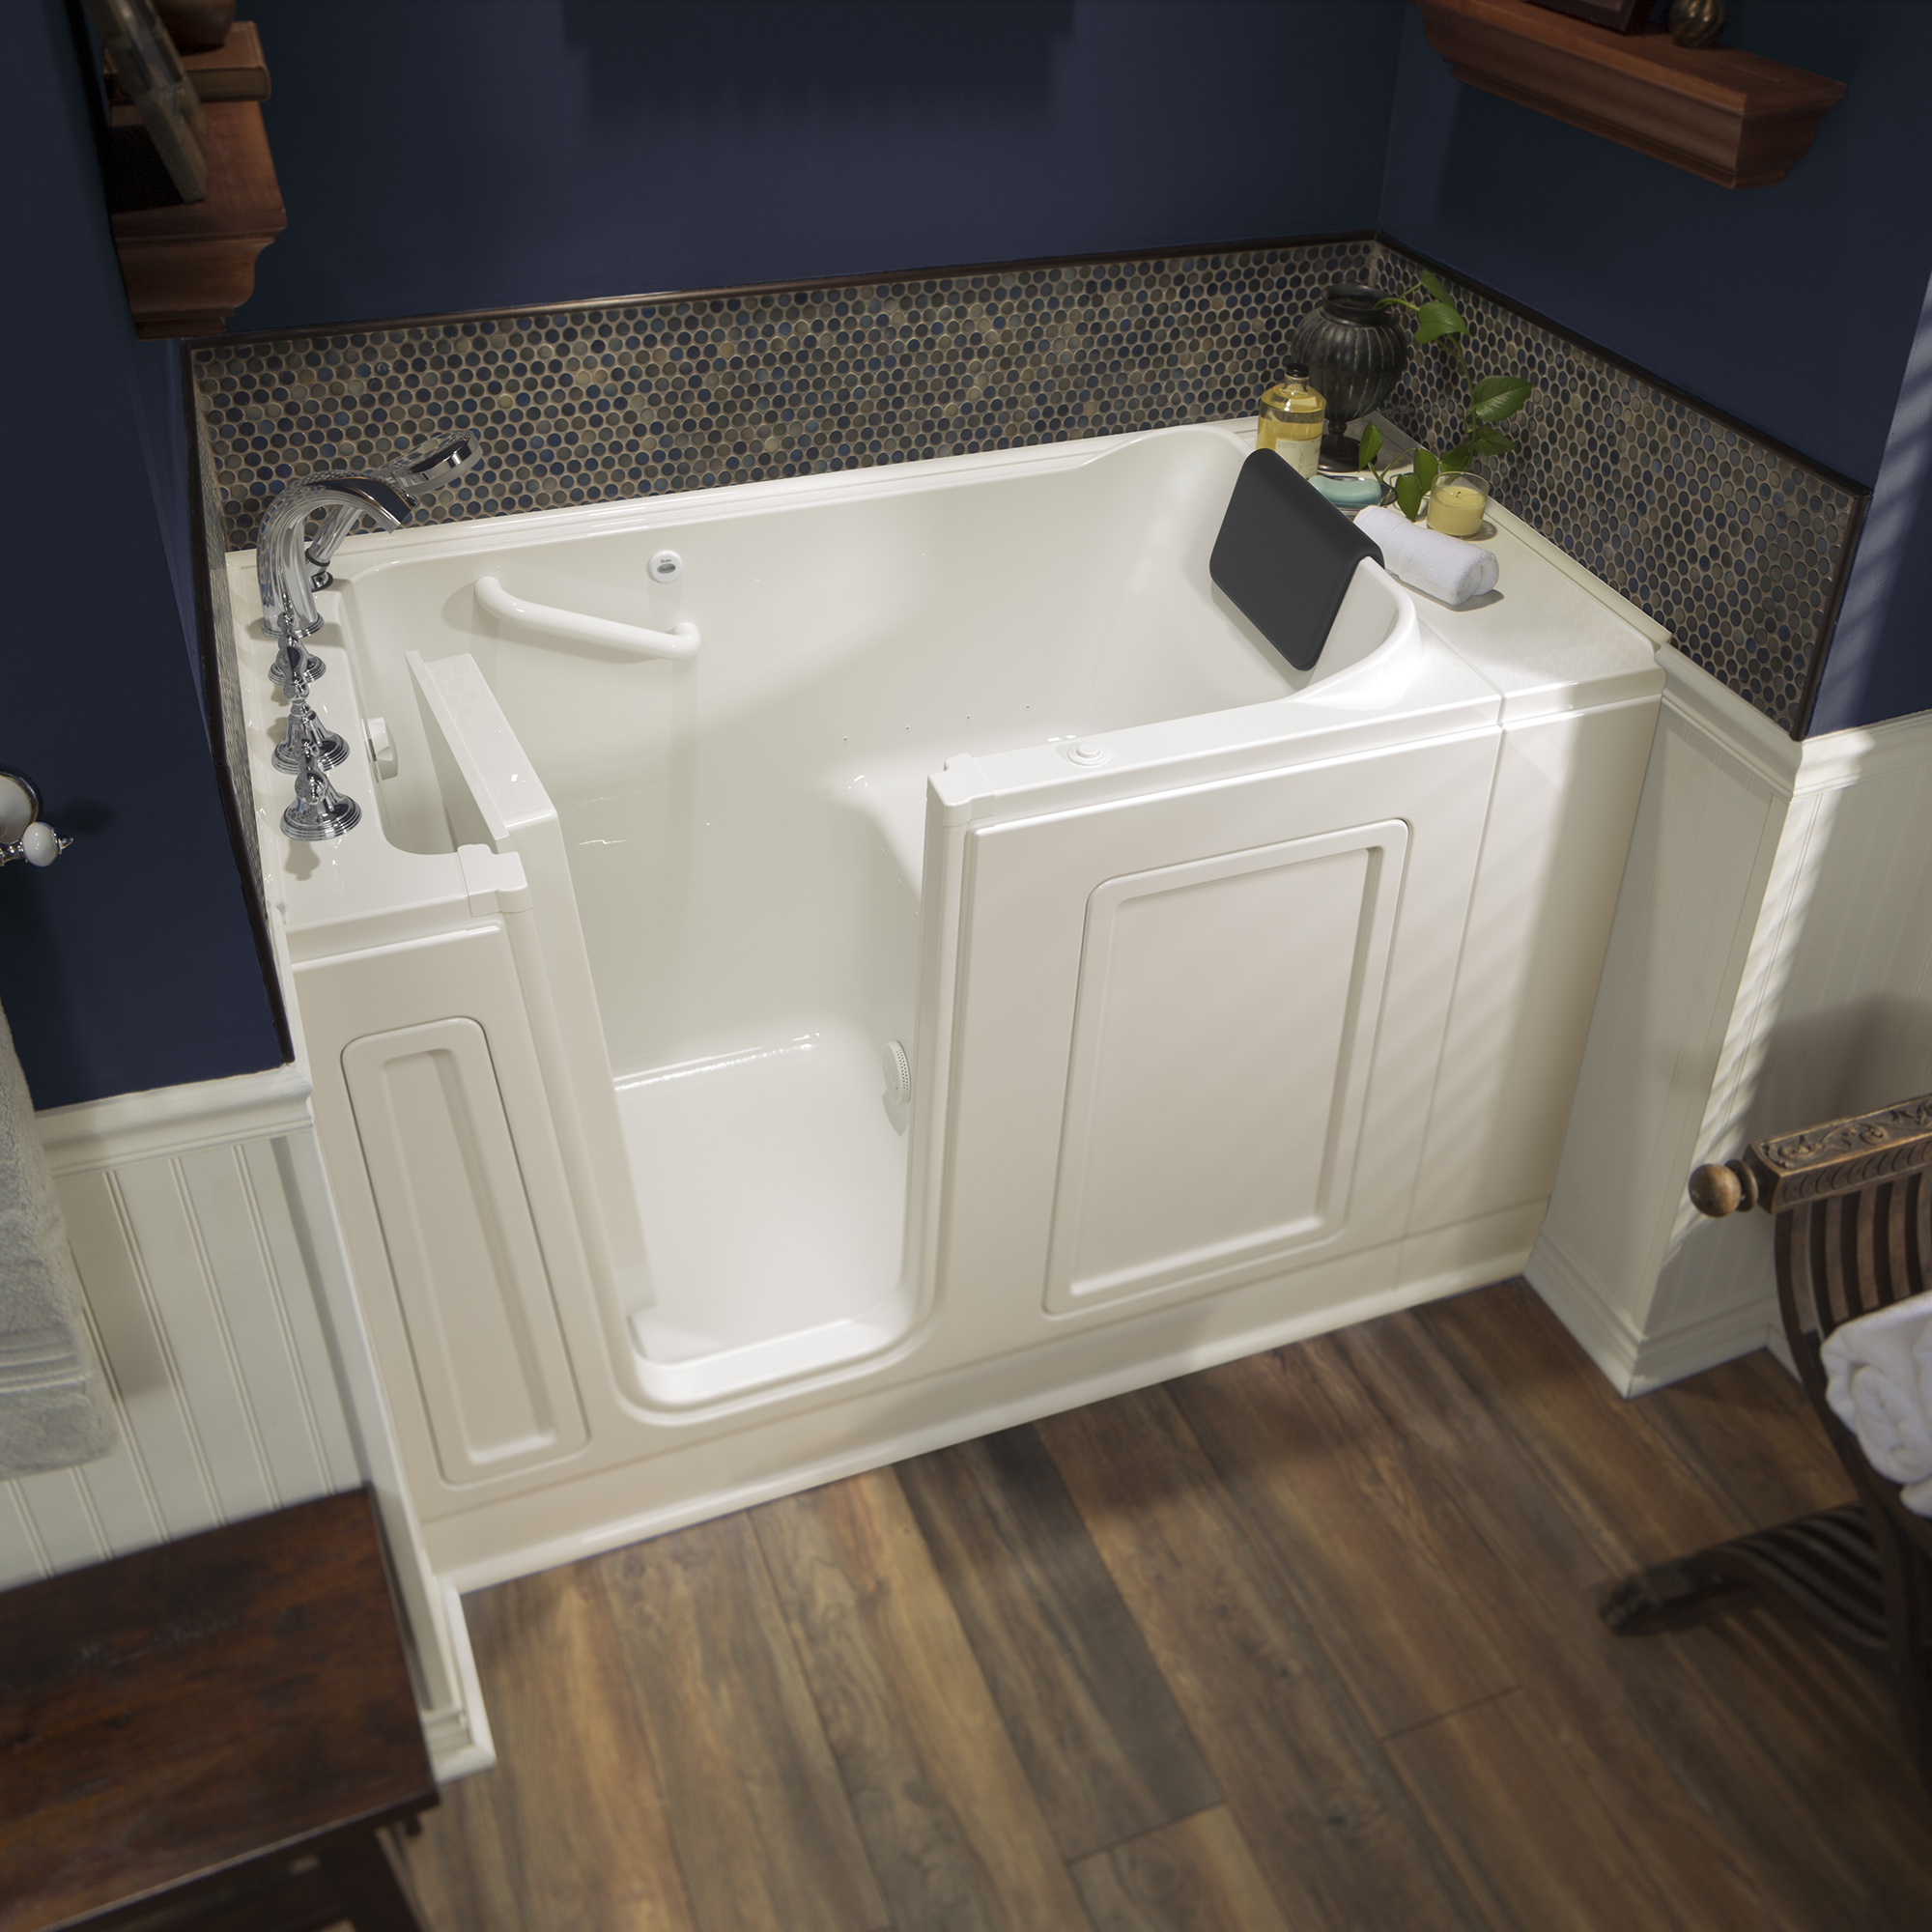 Acrylic Luxury Series 30 x 51 -Inch Walk-in Tub With Air Spa System - Left-Hand Drain With Faucet